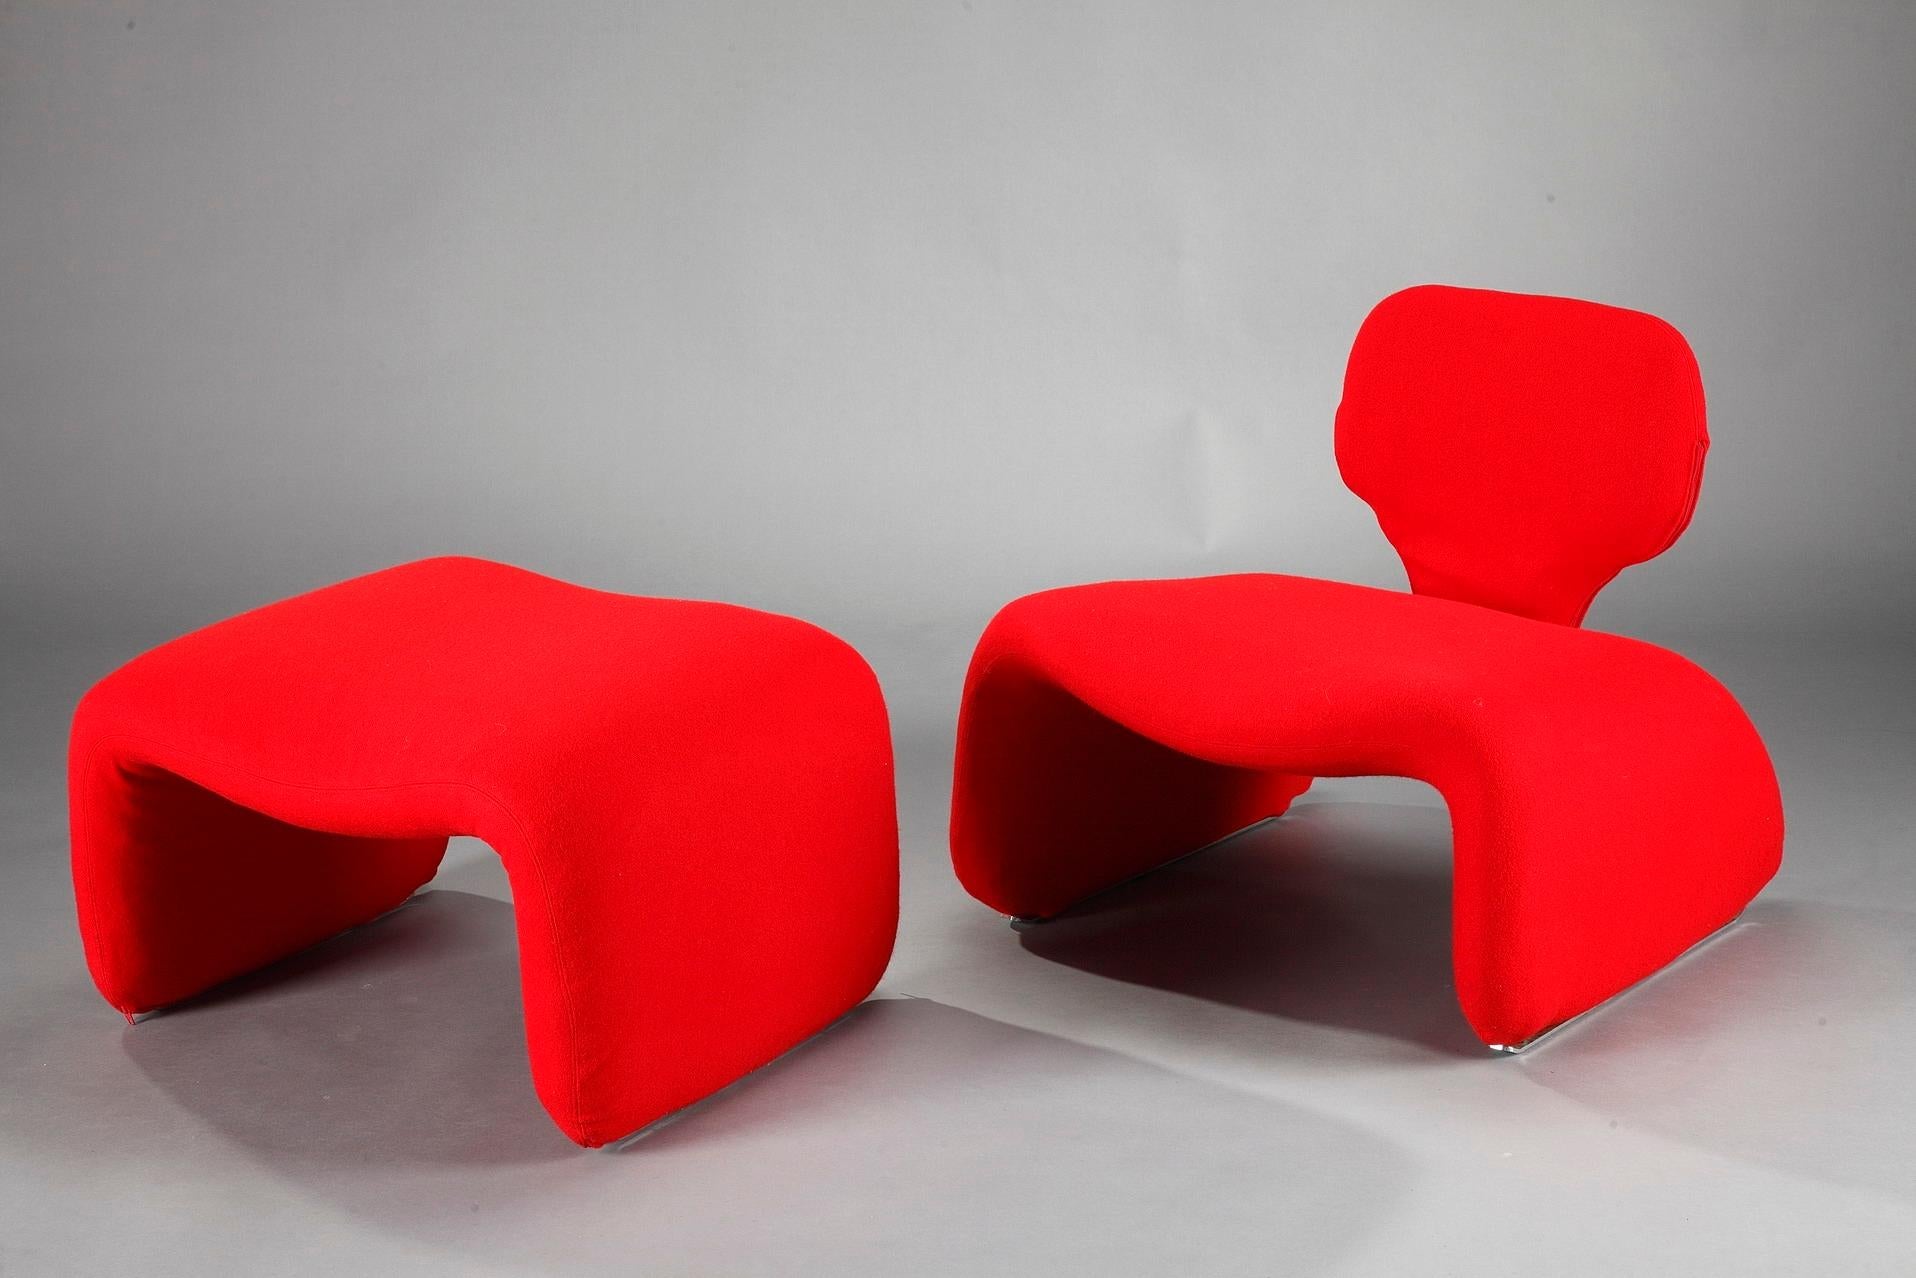 Mid-20th Century Olivier Mourgue & Airborne, Red Djinn Chair for Airborne